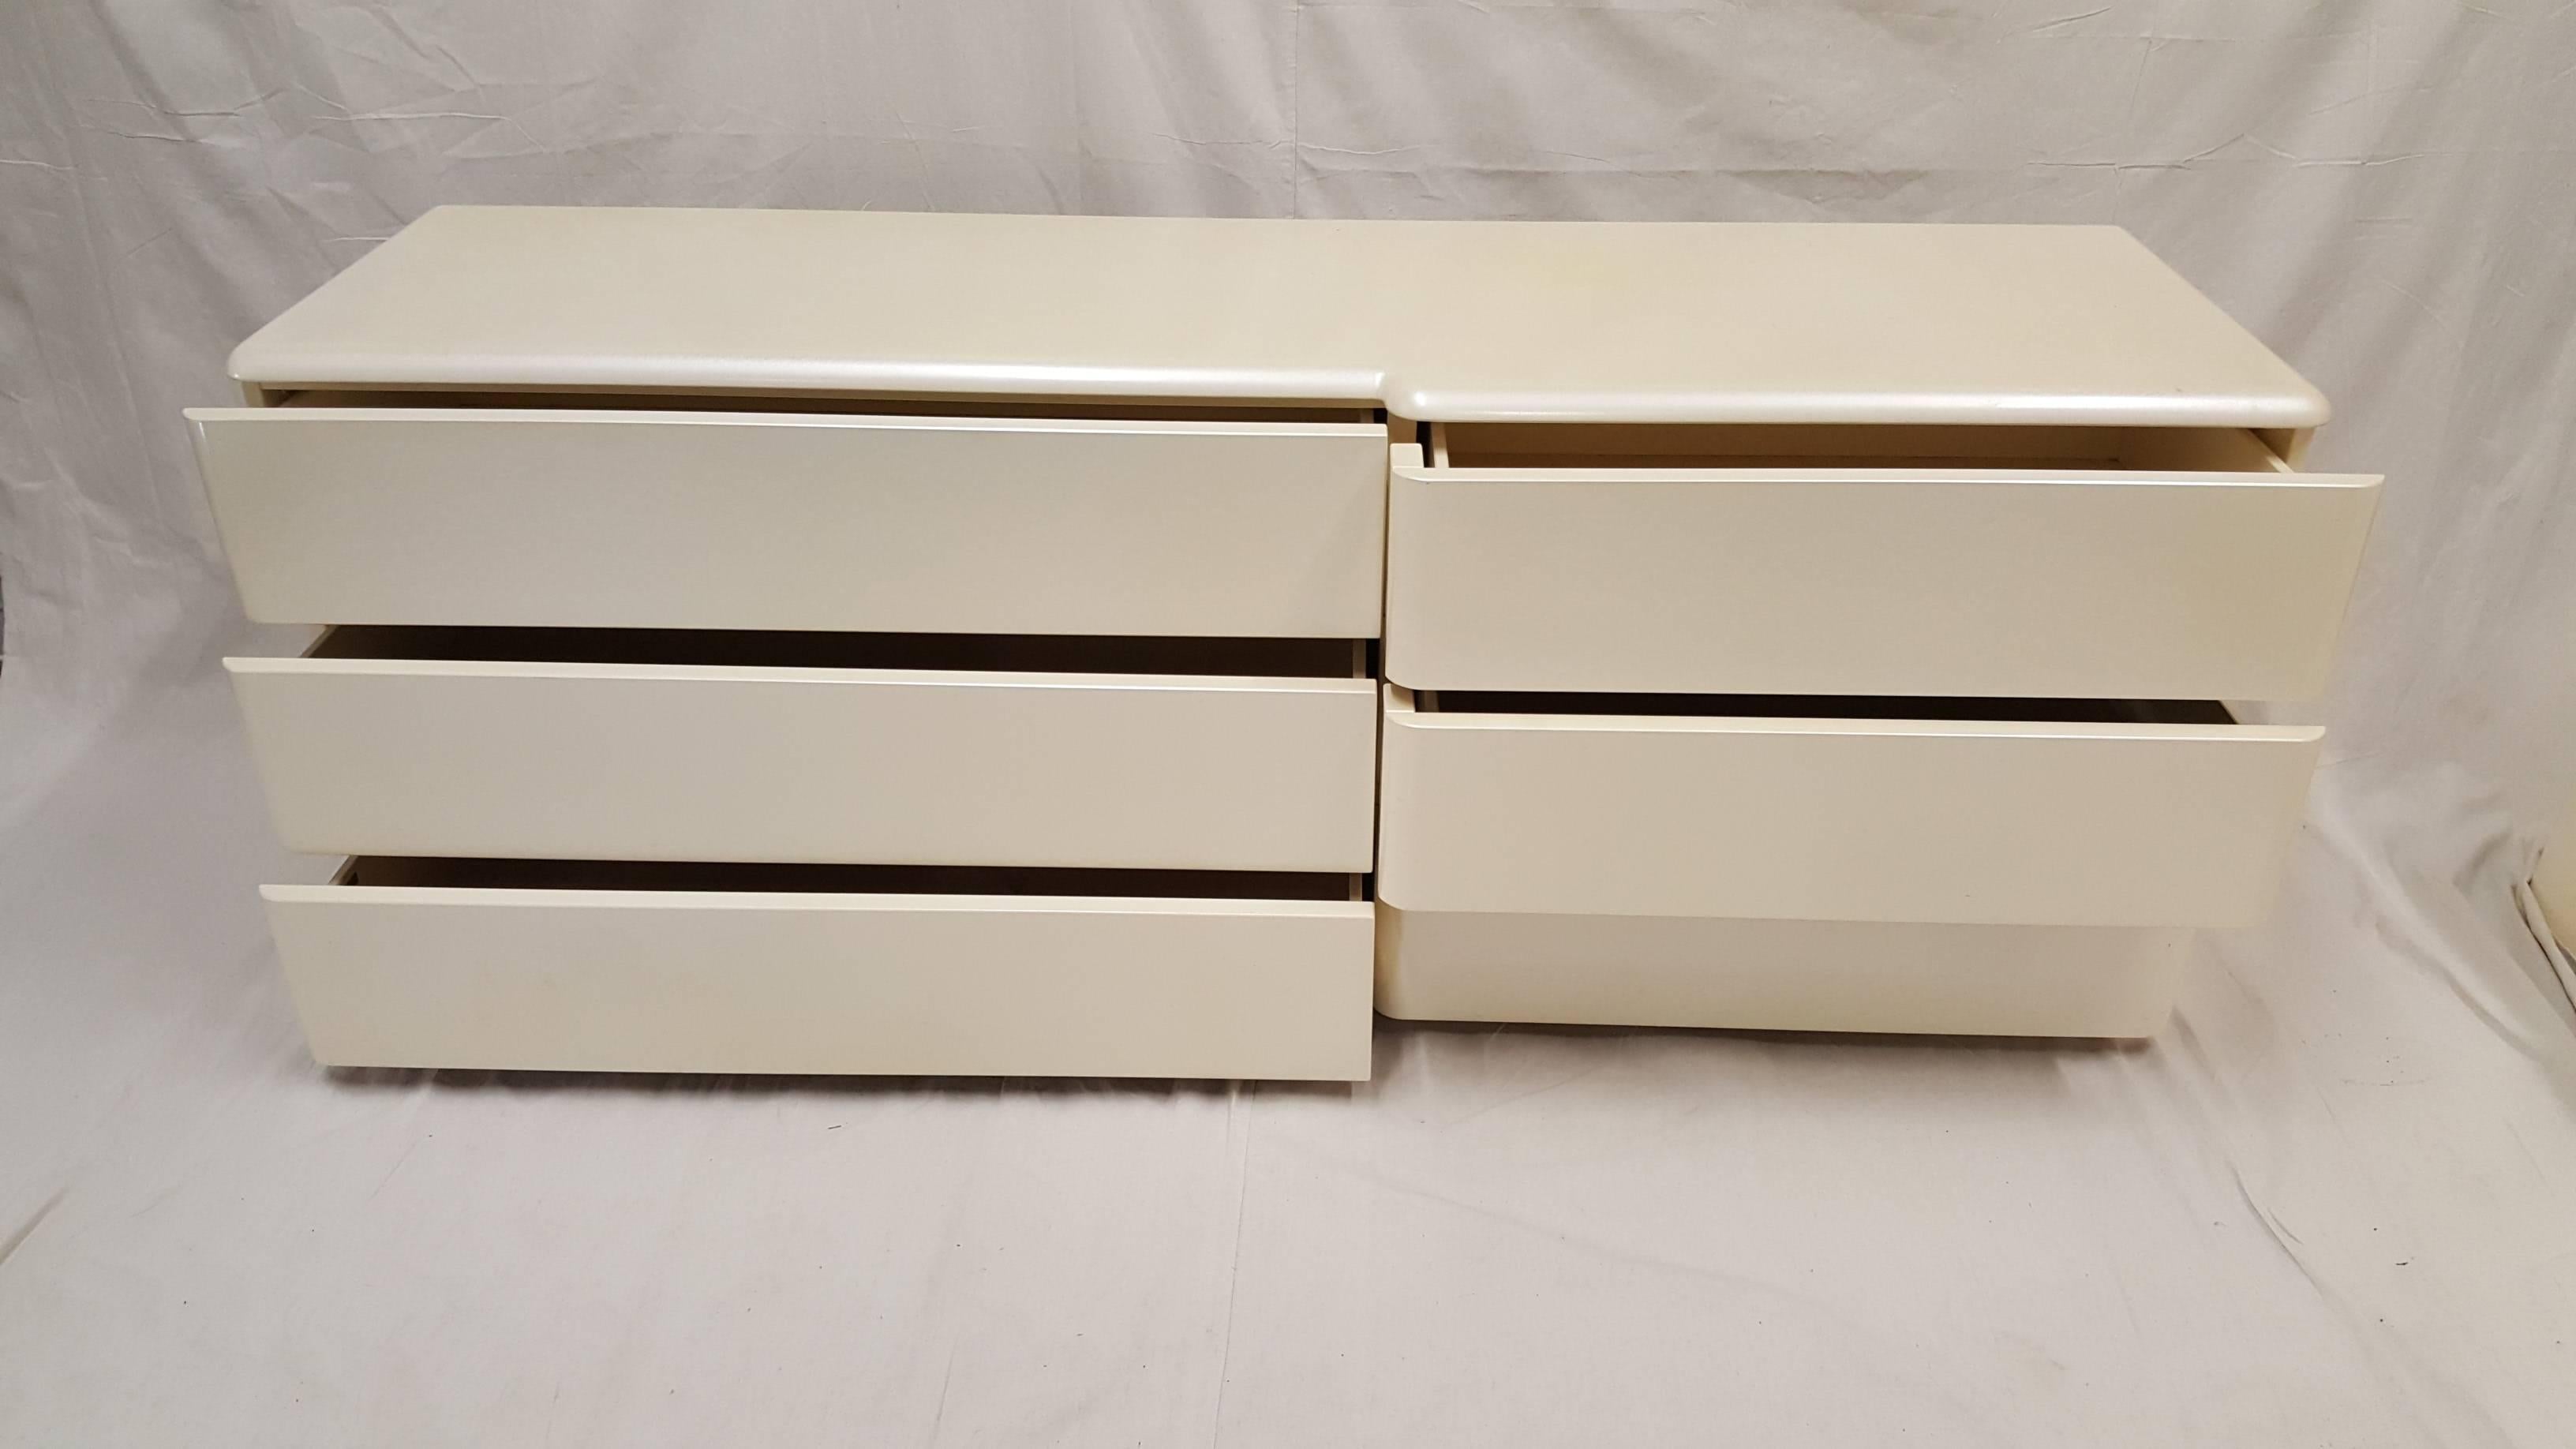 1970s vintage pearl white lacquer dresser with six drawers designed by Mason Rougier. Platform bed available to match the six pullout drawers.